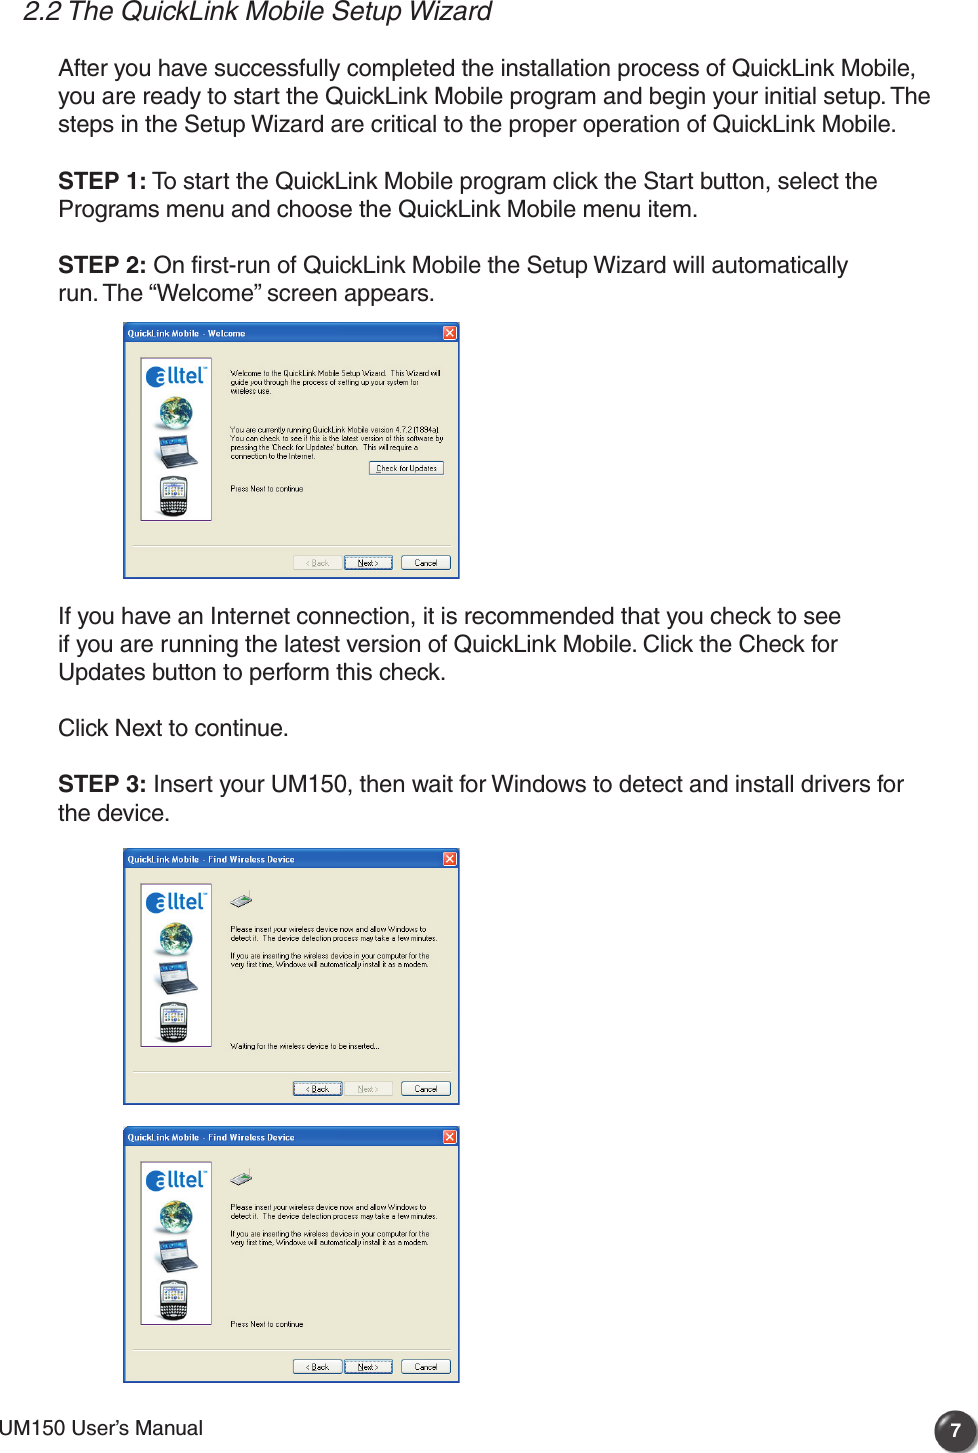 UM150 User’s Manual 7UM150 User’s Manual2.2 The QuickLink Mobile Setup WizardAfter you have successfully completed the installation process of QuickLink Mobile, you are ready to start the QuickLink Mobile program and begin your initial setup. The steps in the Setup Wizard are critical to the proper operation of QuickLink Mobile.STEP 1: To start the QuickLink Mobile program click the Start button, select the Programs menu and choose the QuickLink Mobile menu item.STEP 2: On first-run of QuickLink Mobile the Setup Wizard will automatically run. The “Welcome” screen appears. If you have an Internet connection, it is recommended that you check to see if you are running the latest version of QuickLink Mobile. Click the Check for Updates button to perform this check.Click Next to continue.STEP 3: Insert your UM150, then wait for Windows to detect and install drivers for the device.  